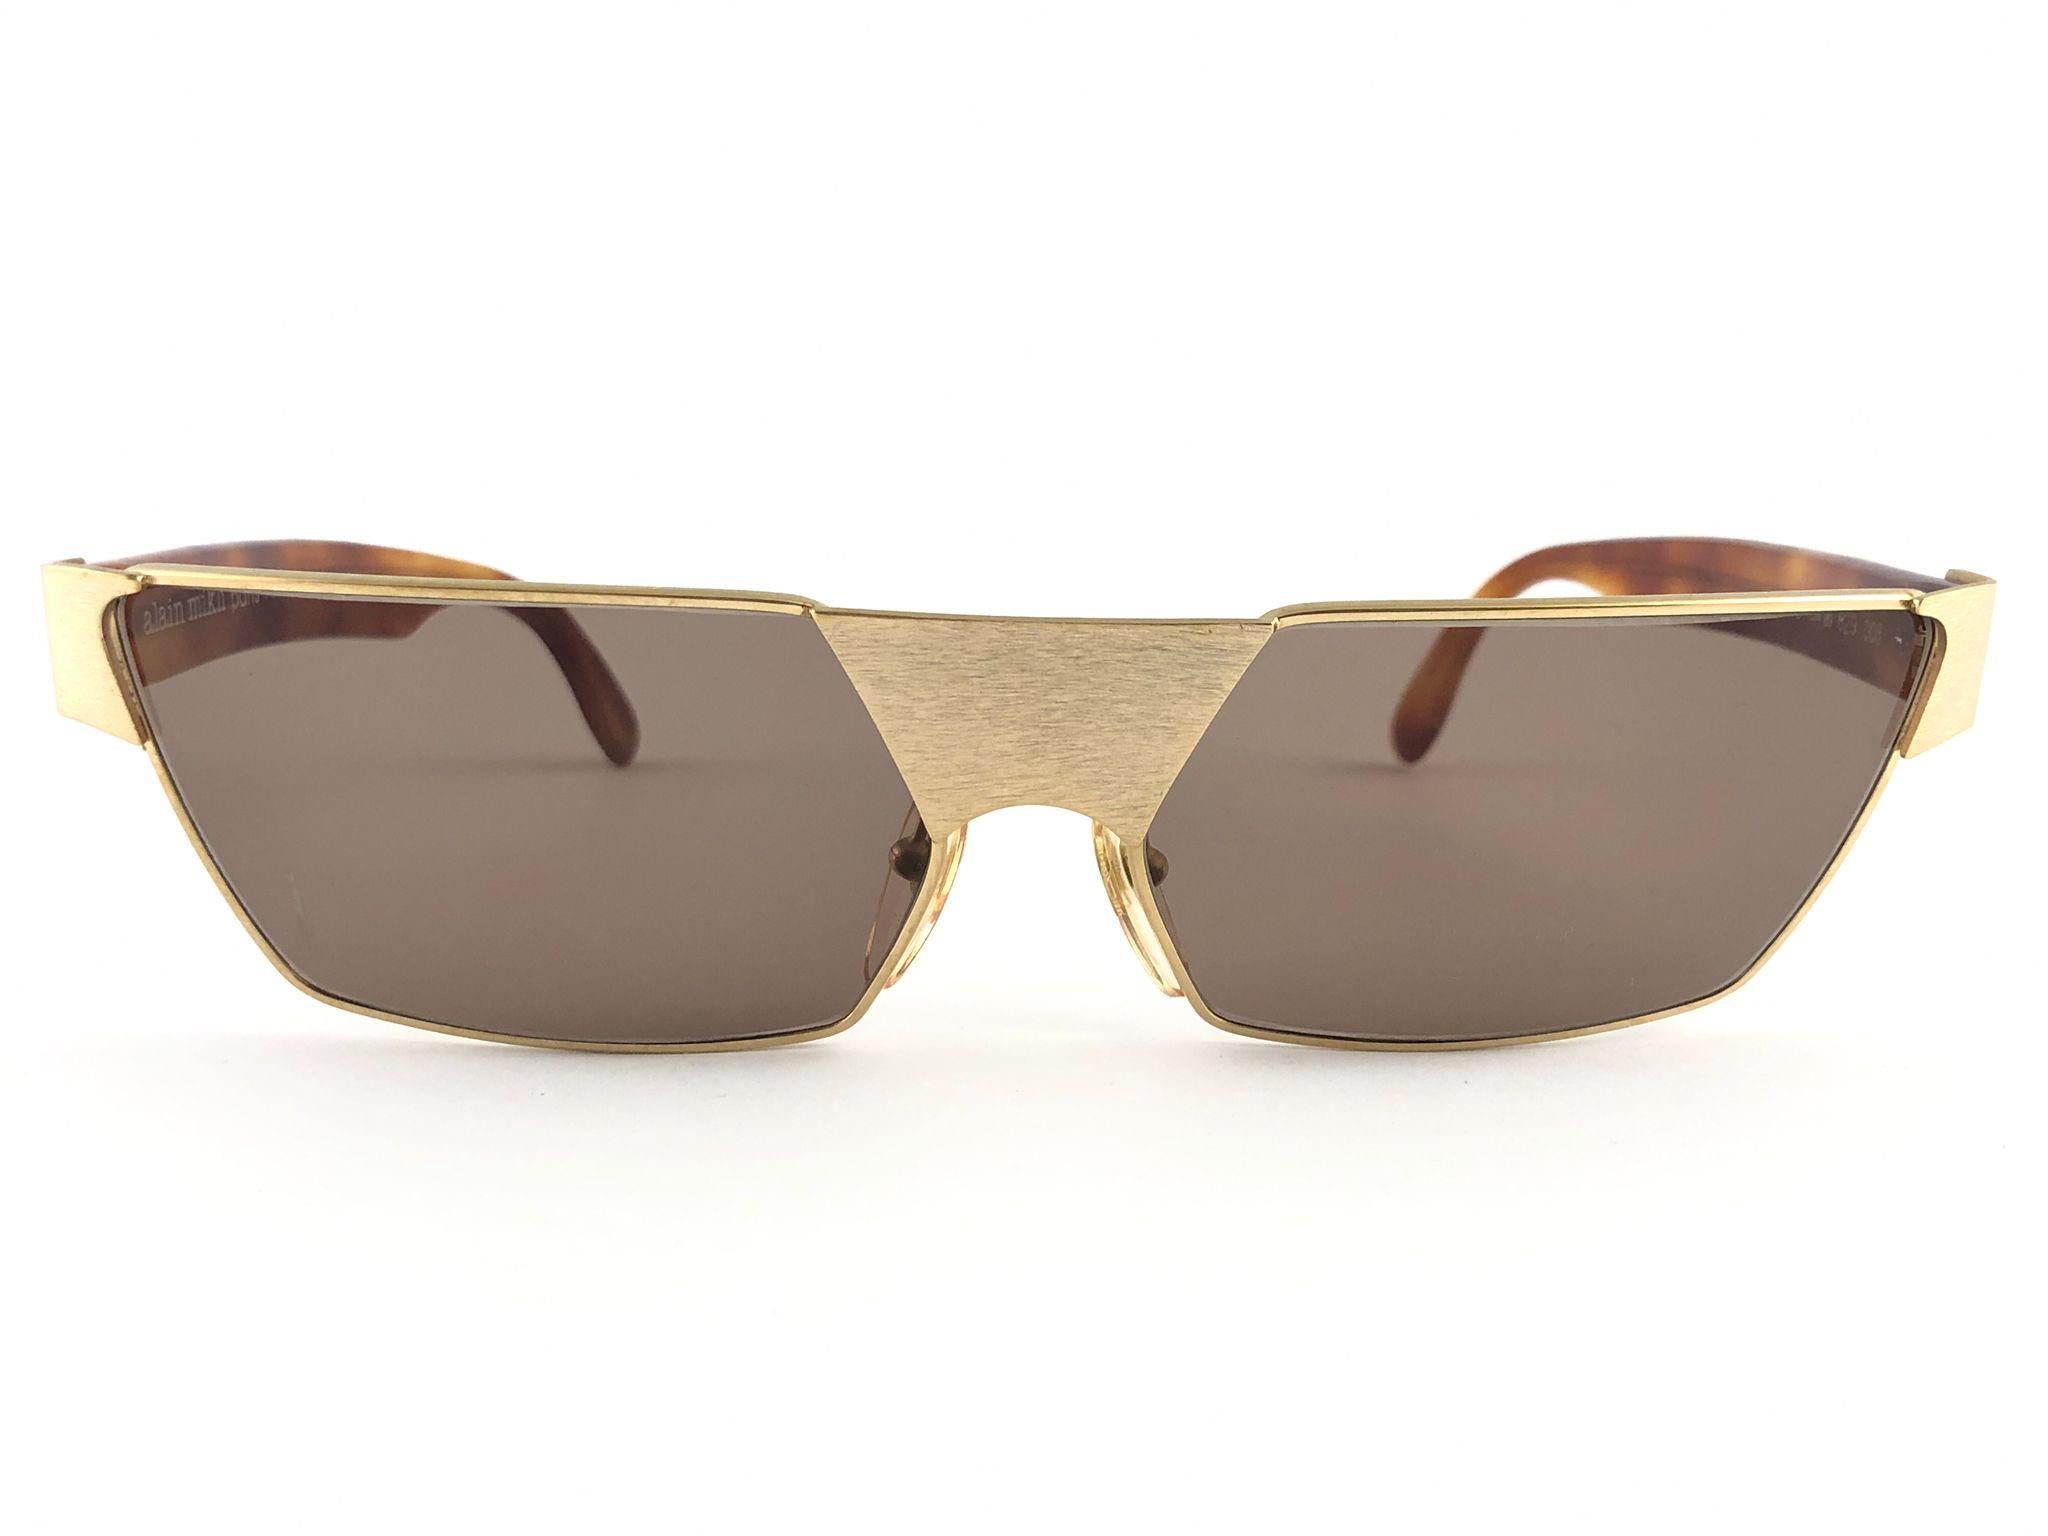 New Vintage Alain Mikli gold & tortoise with medium brown lenses frame.

Rare item in new and unworn condition. 

Please consider that this item is nearly 40 years old so it could show minor sign of wear due to storage.

Made in